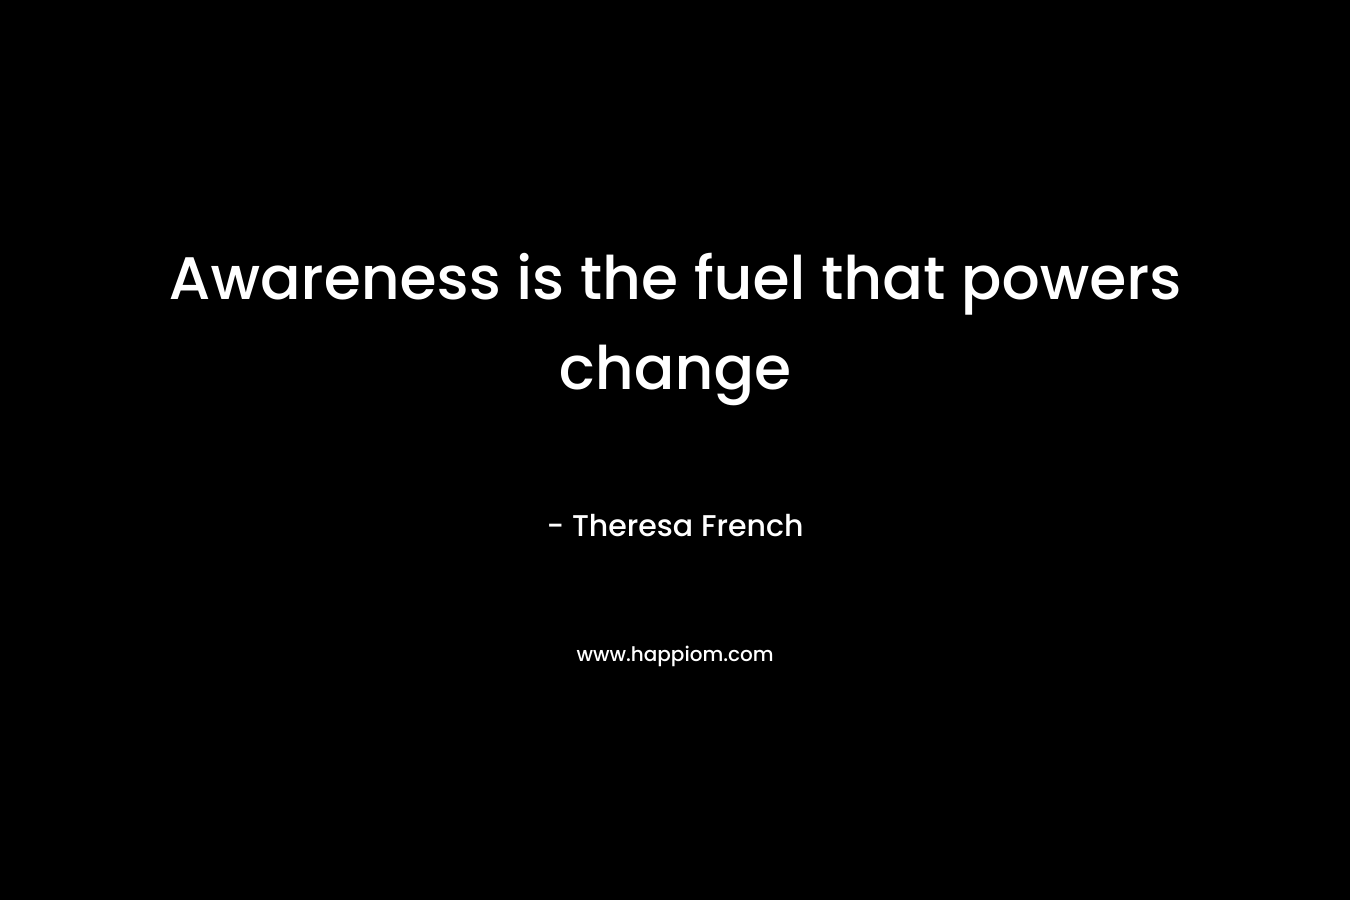 Awareness is the fuel that powers change